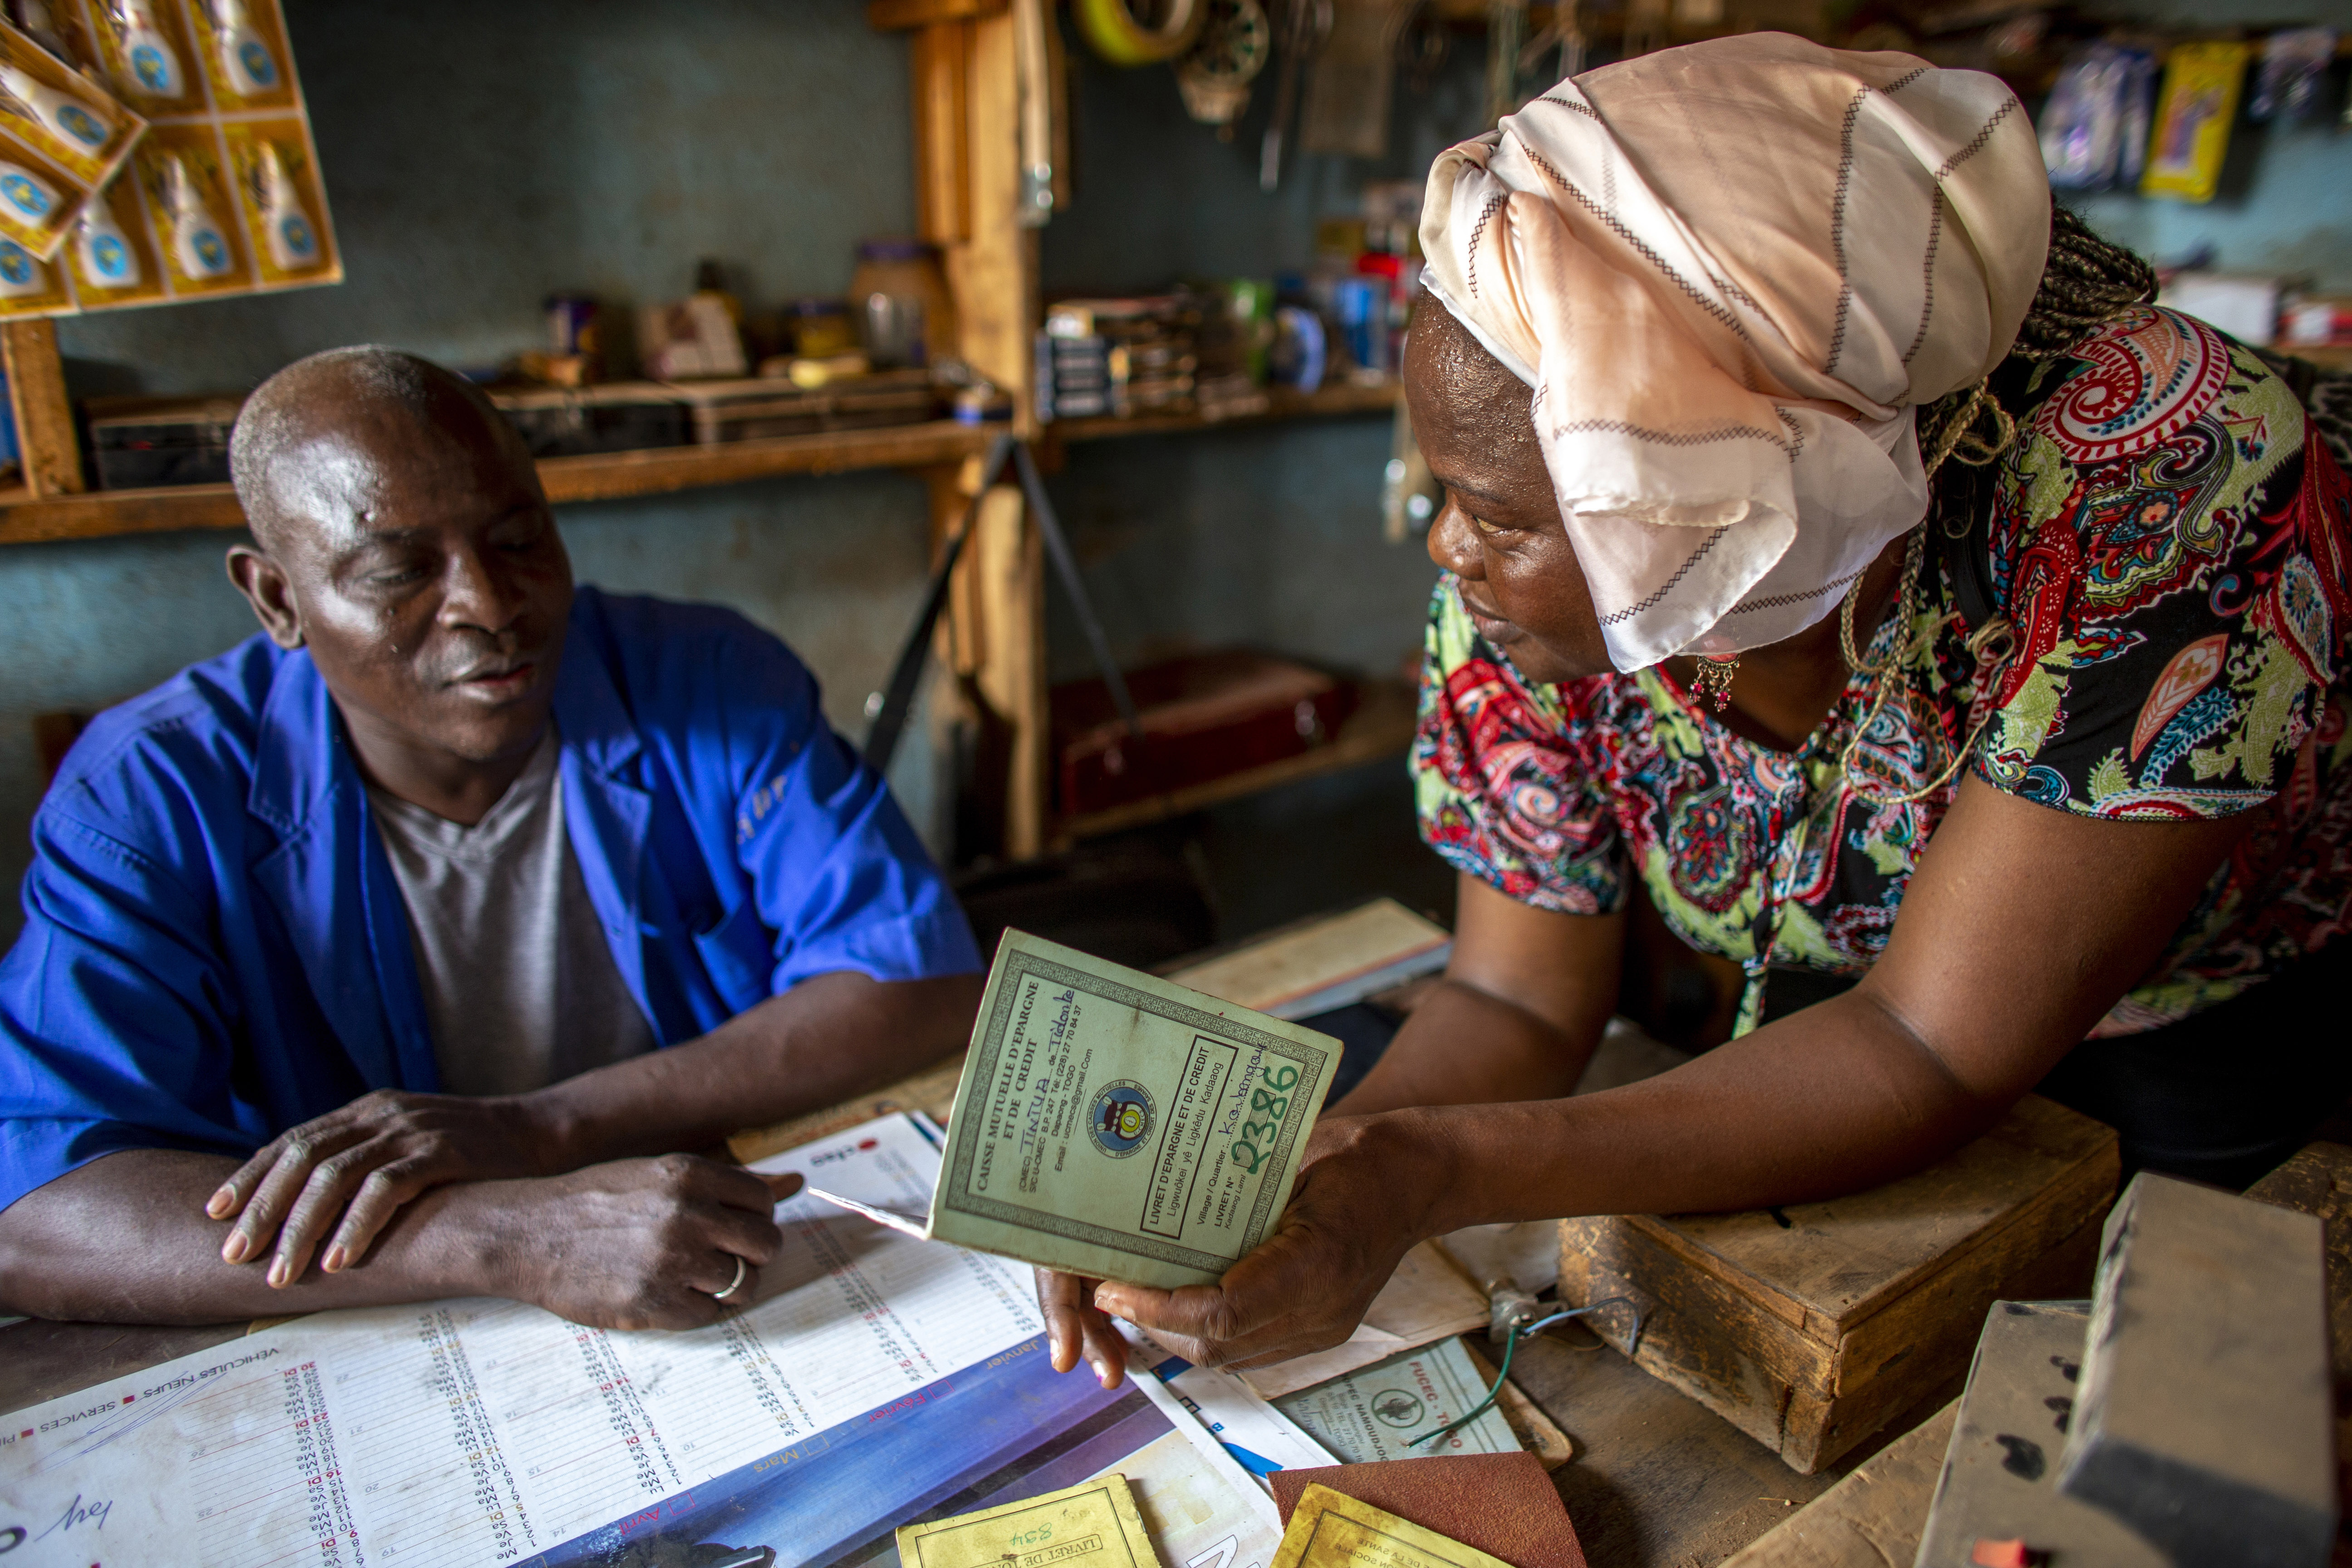 Inclusive finance allows access to financial and non-financial services and products for the poorest.